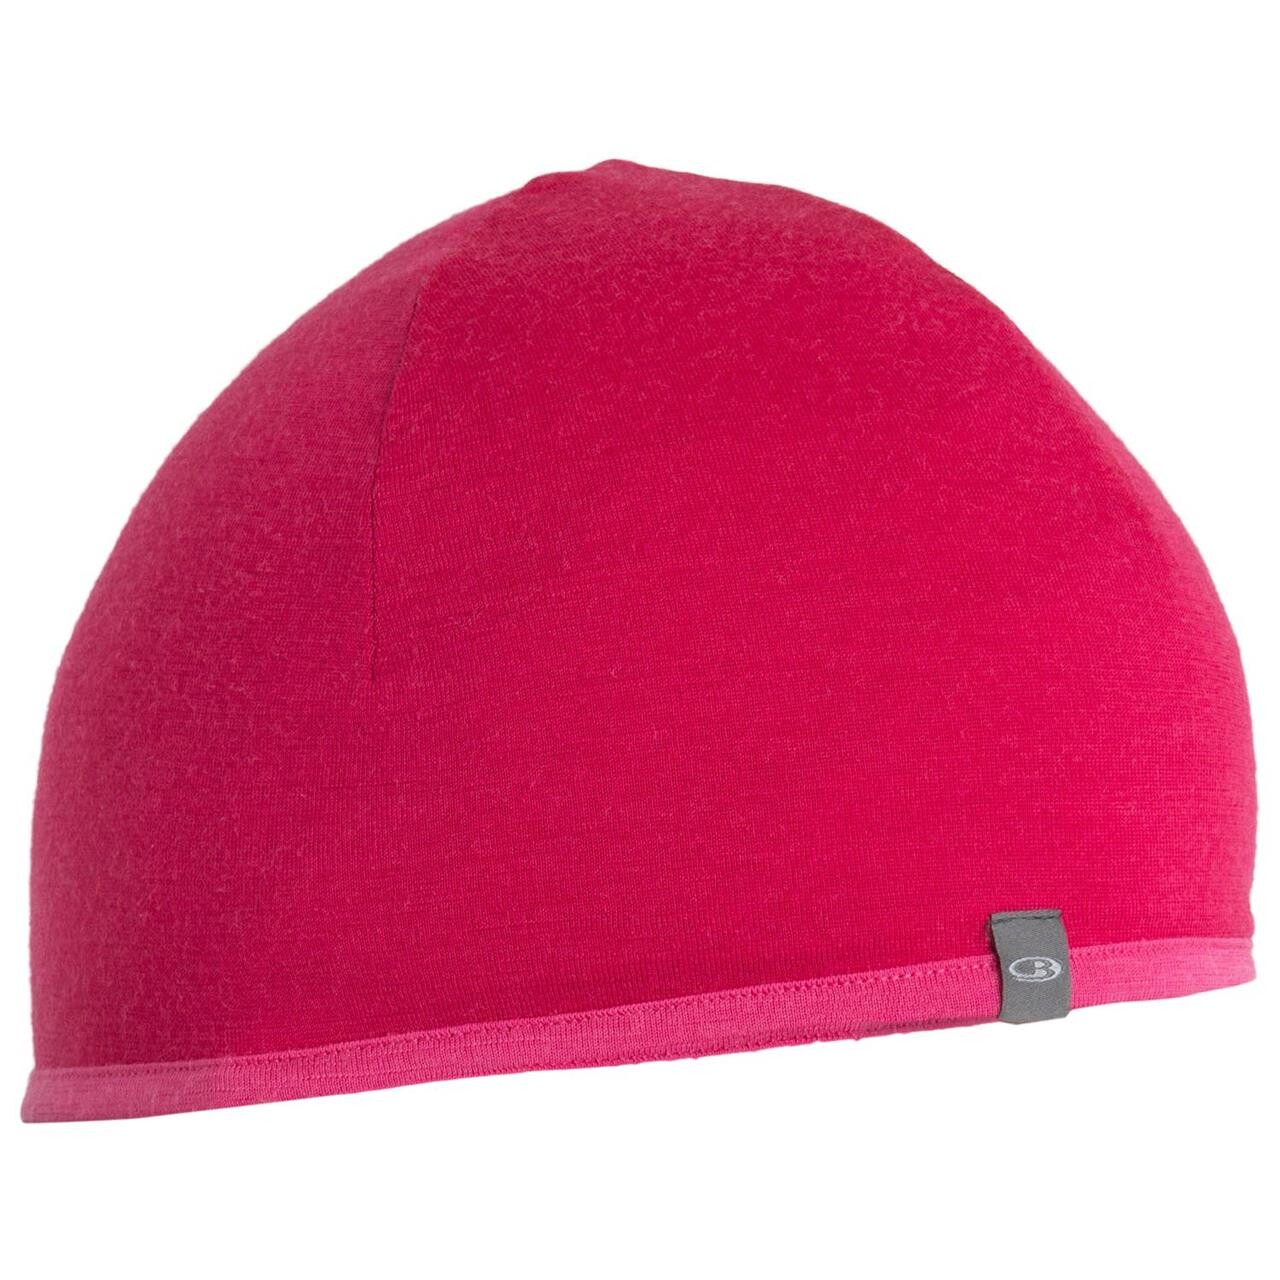 Icebreaker Pocket 200 Hat (Lyserød (ELECTRON PINK/TEMPO) One size)